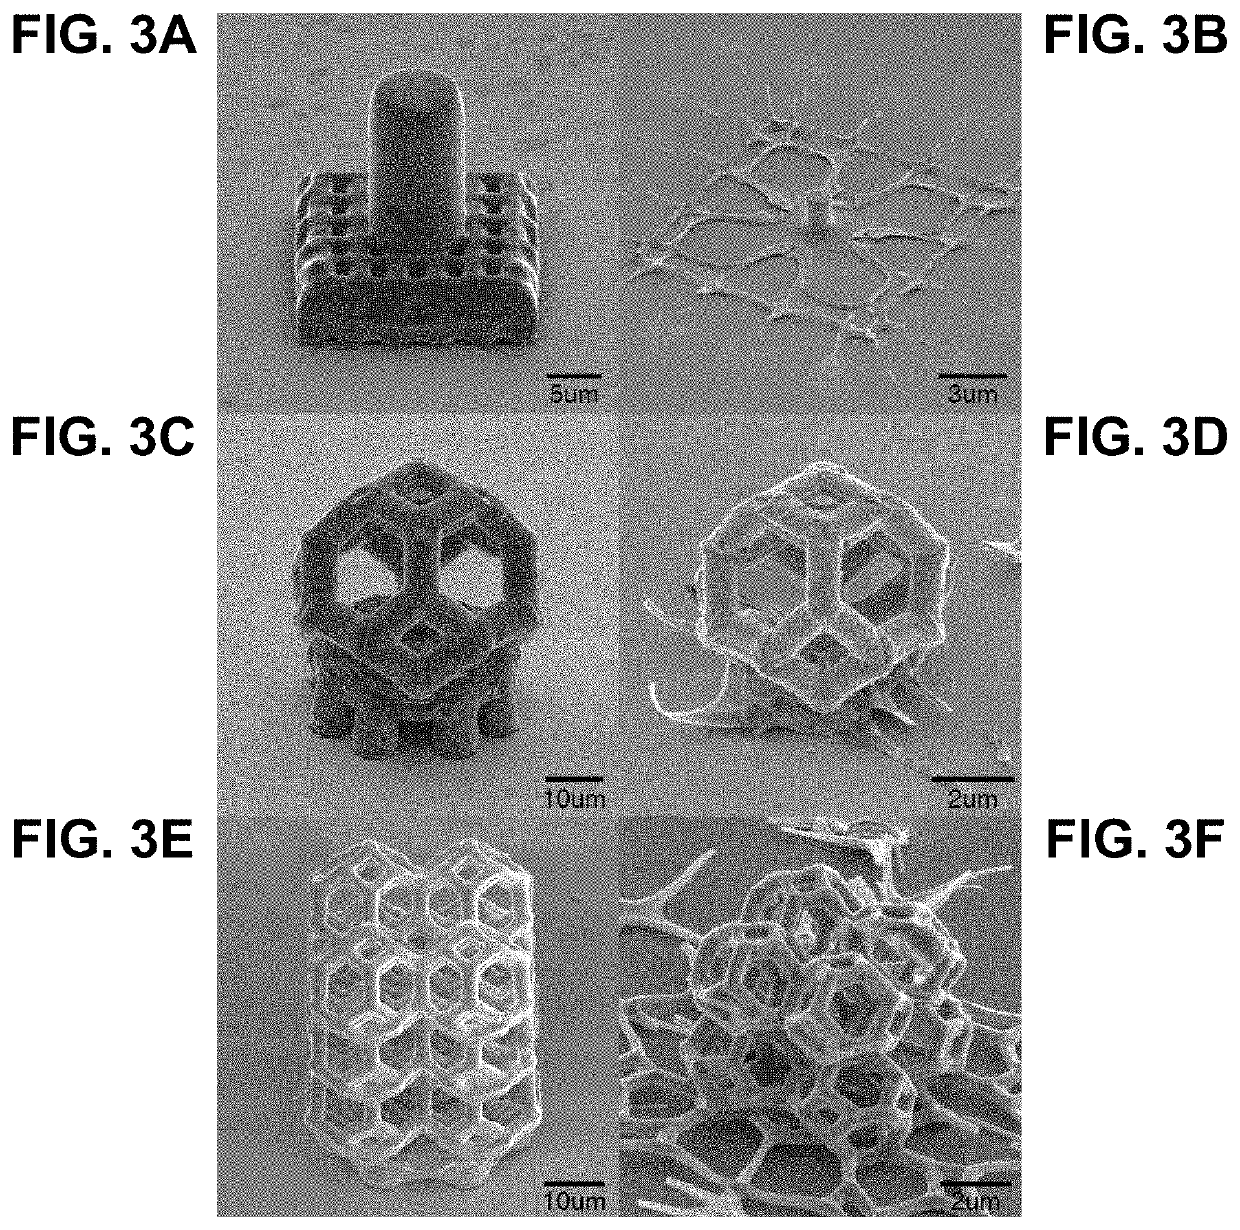 3D printing of metal containing structures